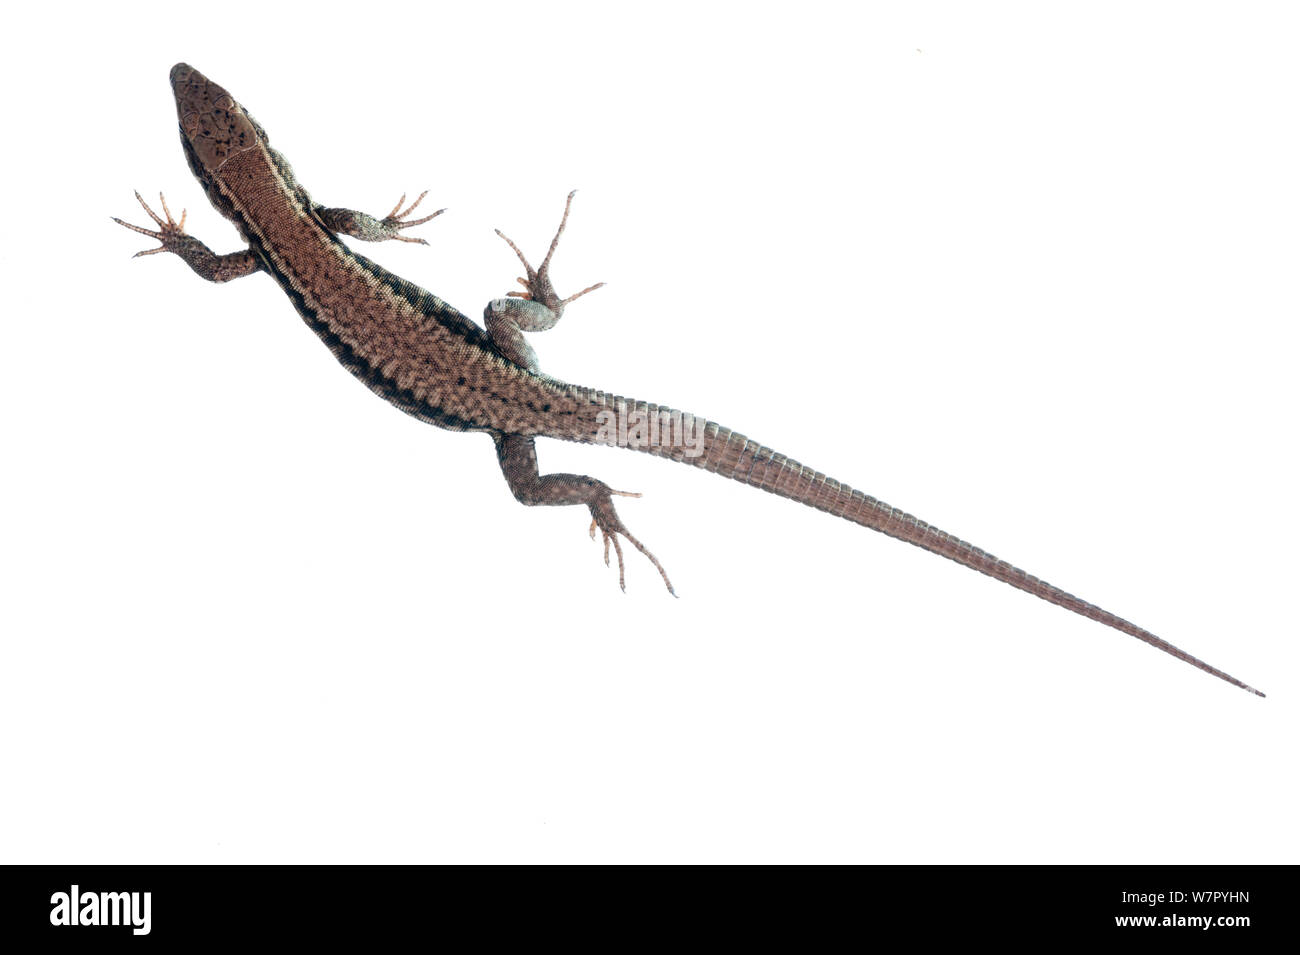 Wall Lizard (Podarcis lilfordi) against white background. France, August. Stock Photo